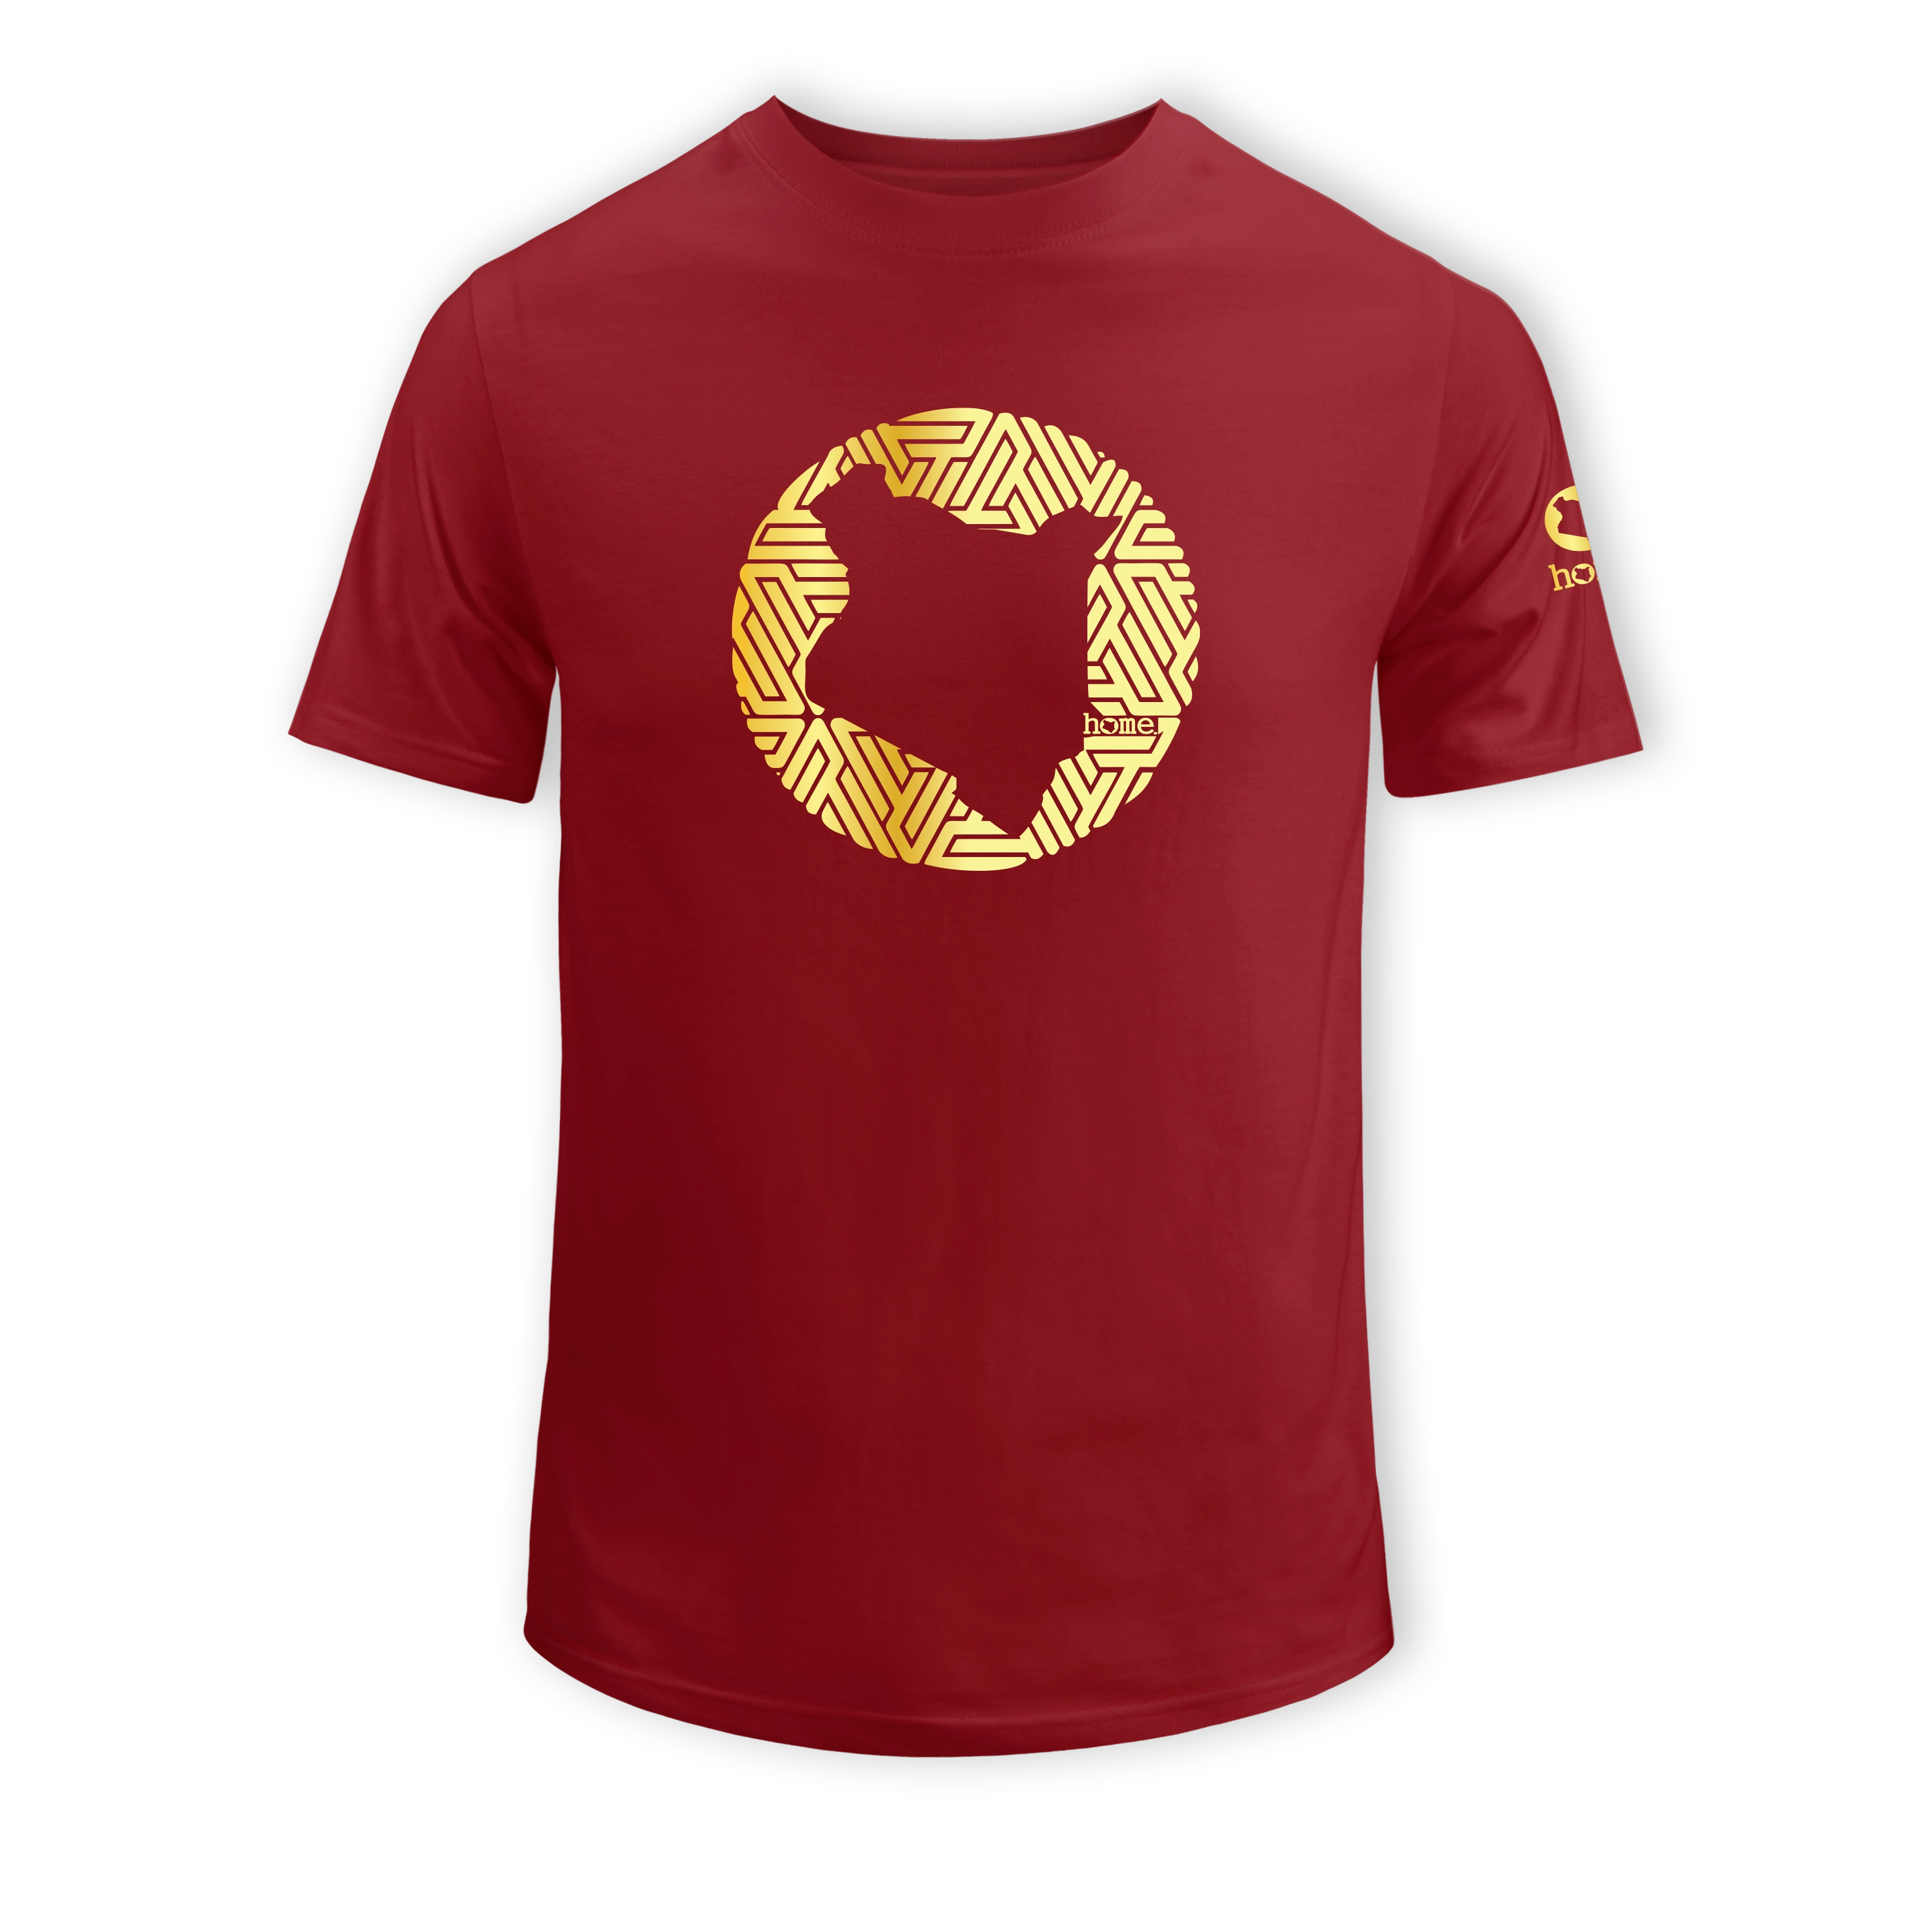 home_254 SHORT-SLEEVED MAROON RED T-SHIRT WITH A GOLD MAP PRINT – COTTON PLUS FABRIC